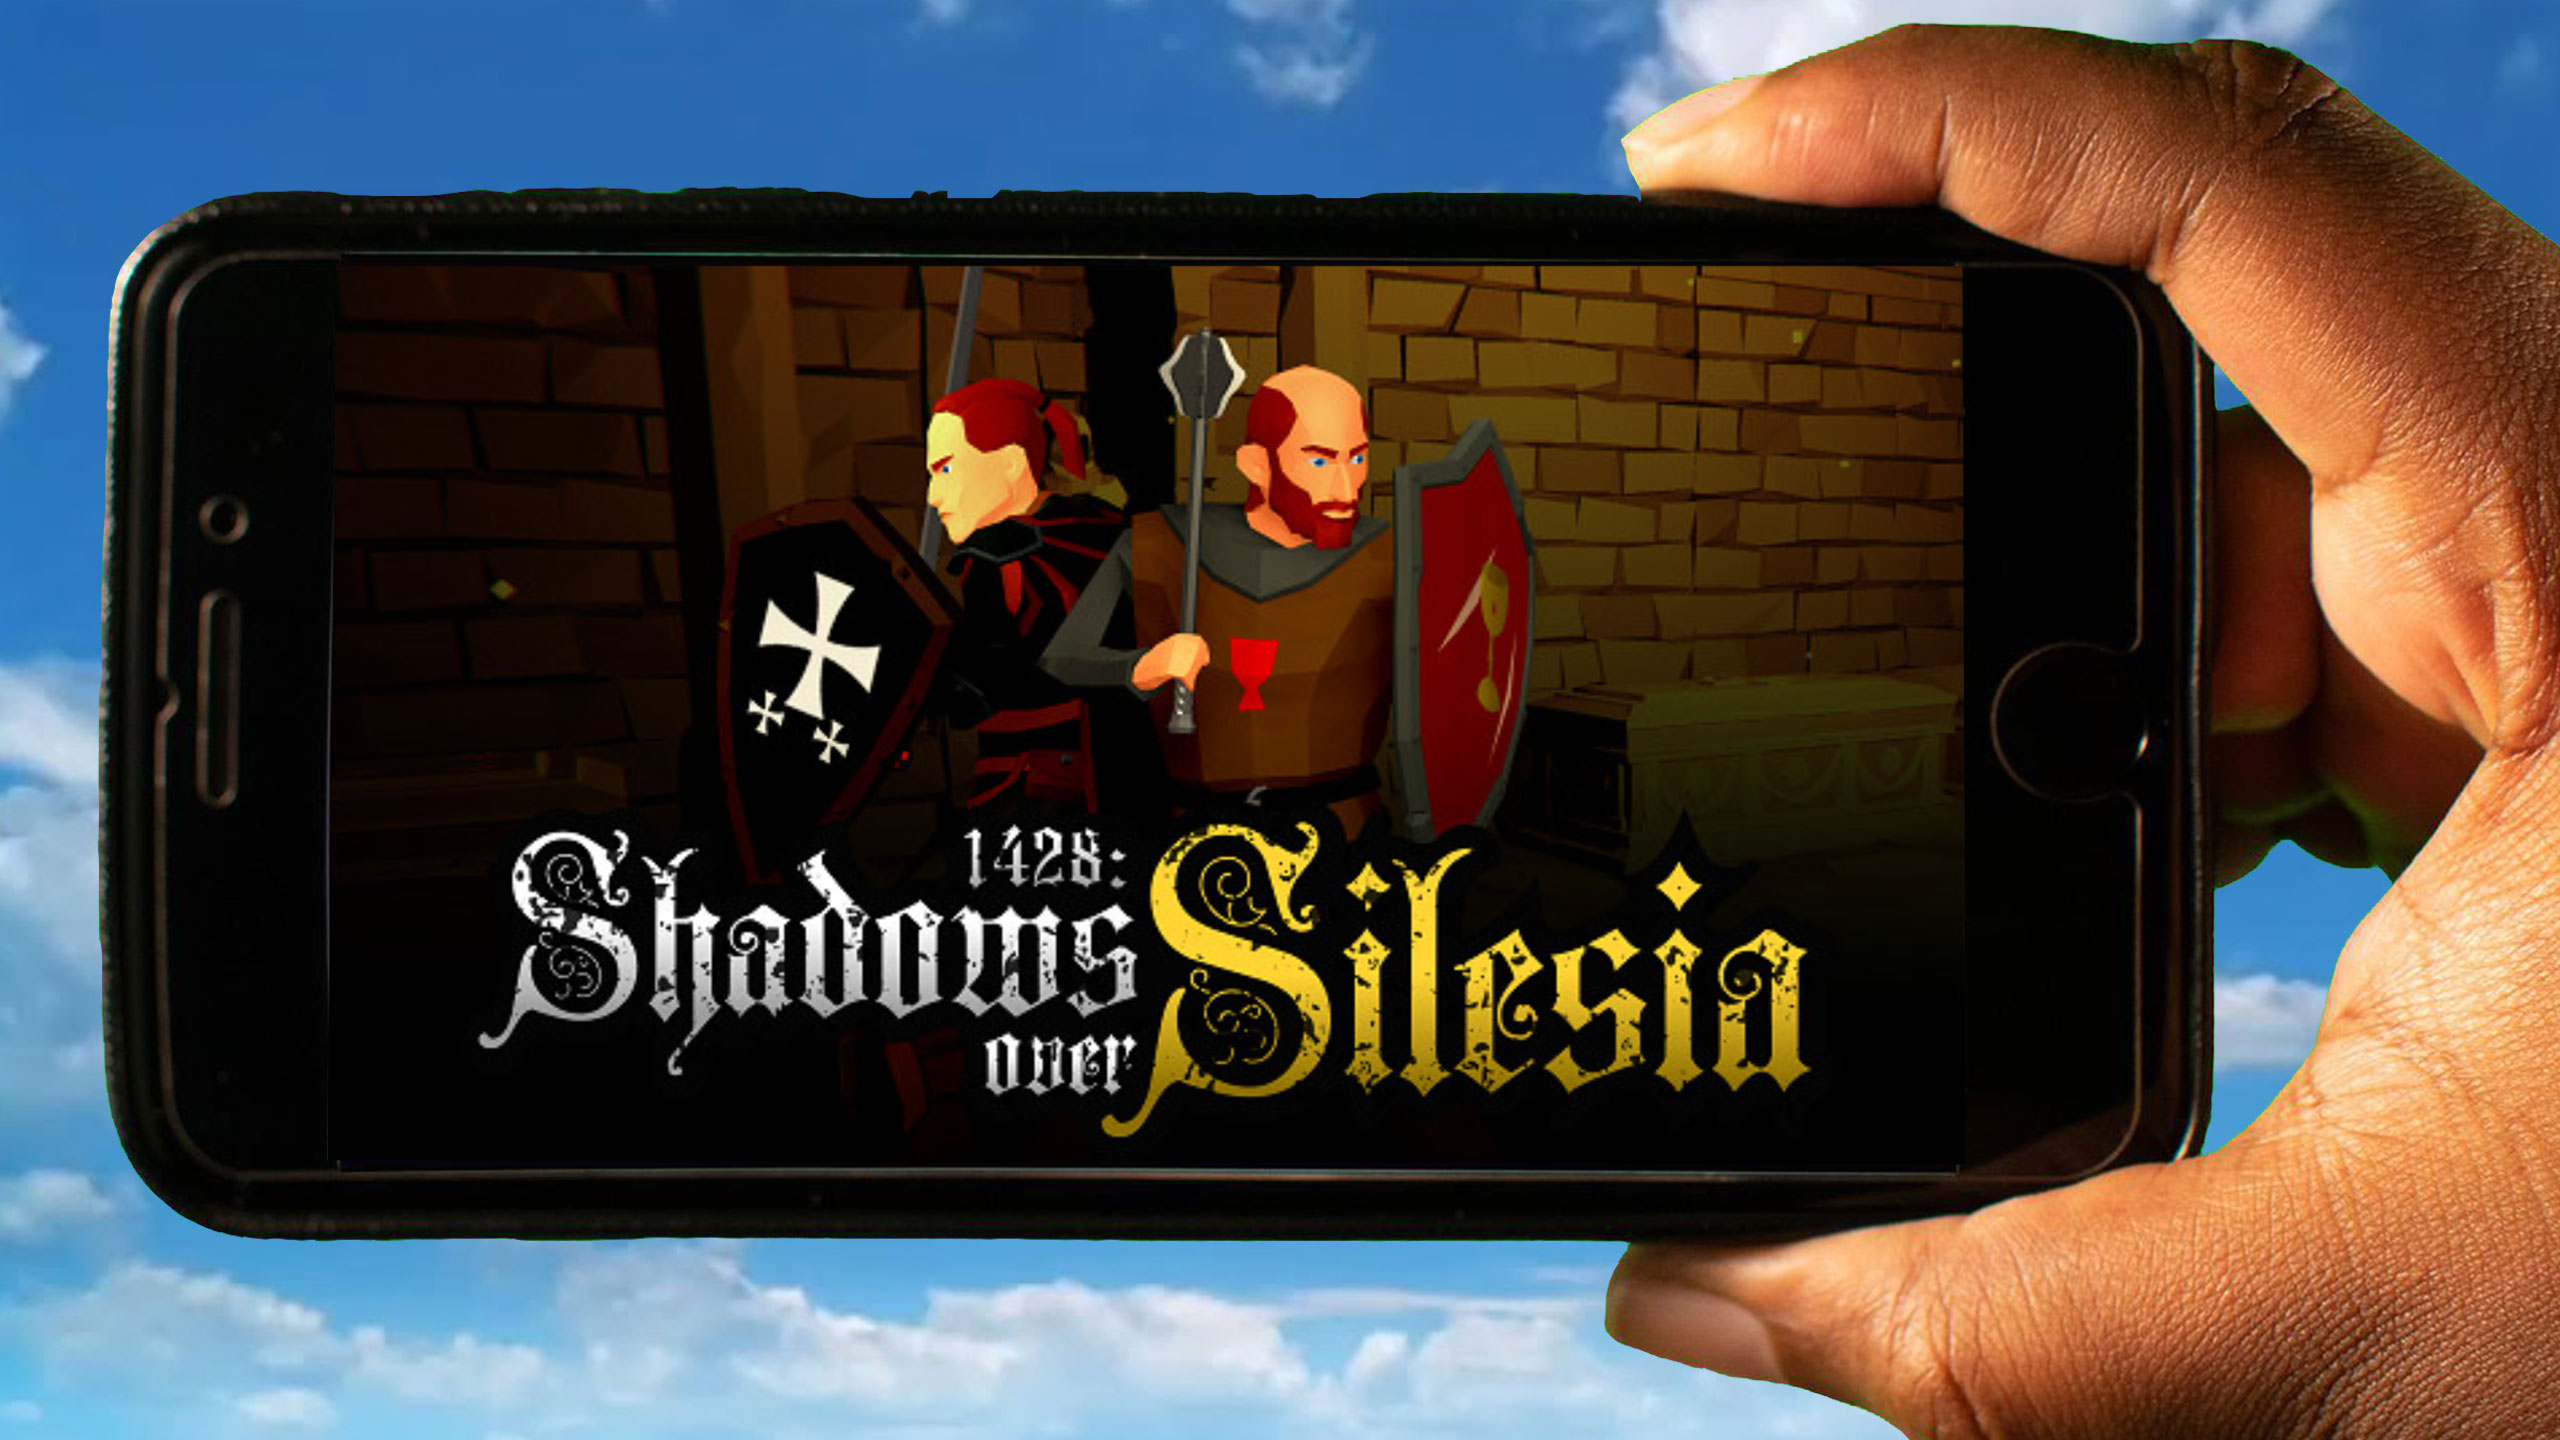 free for ios download 1428: Shadows over Silesia